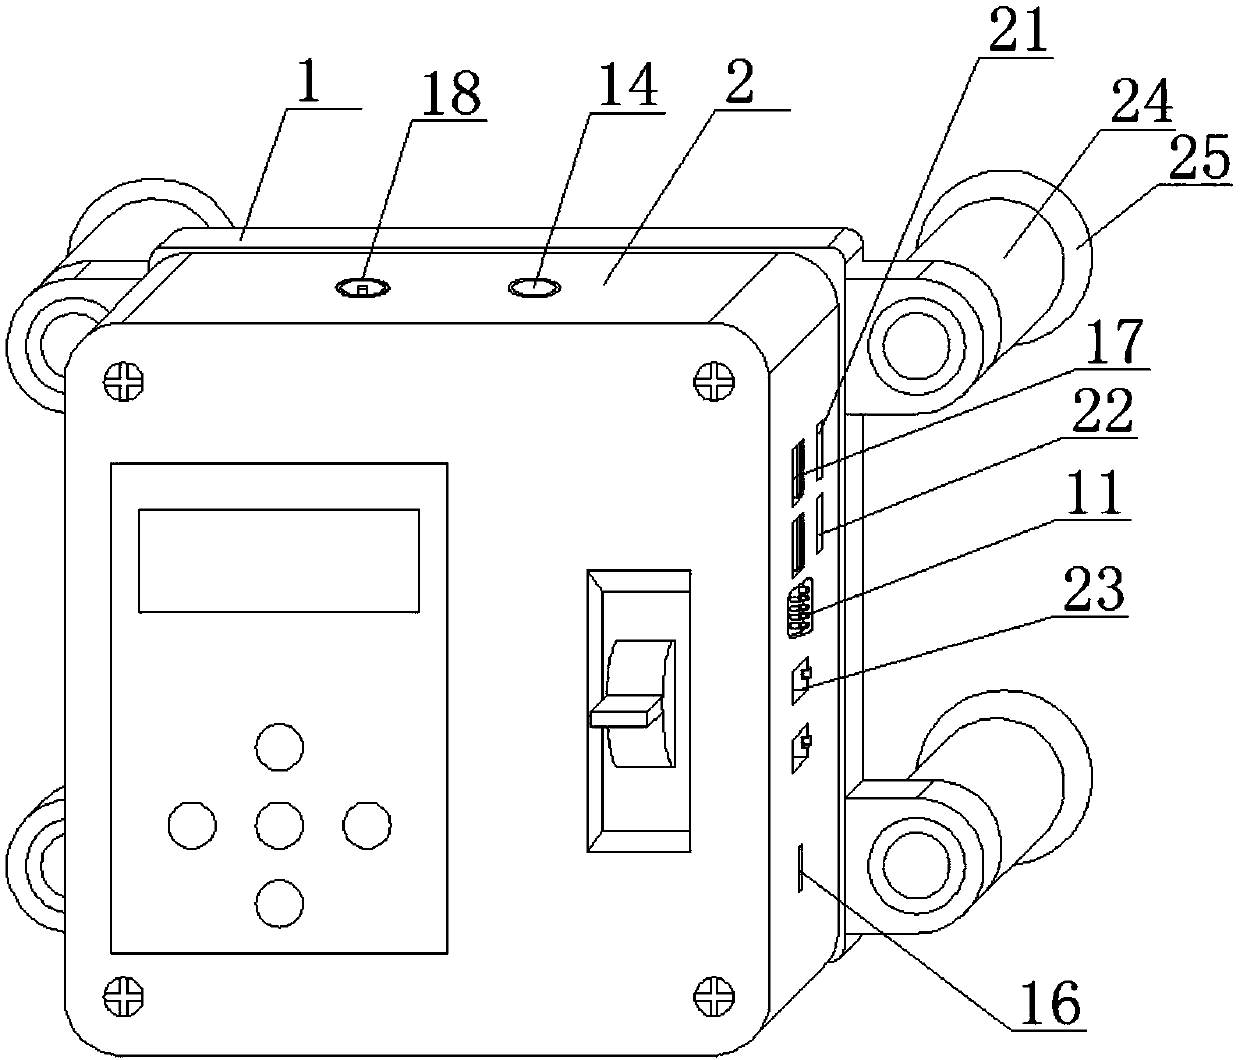 Sharing device for synthesizing multiple signals and transmitting in WIFI